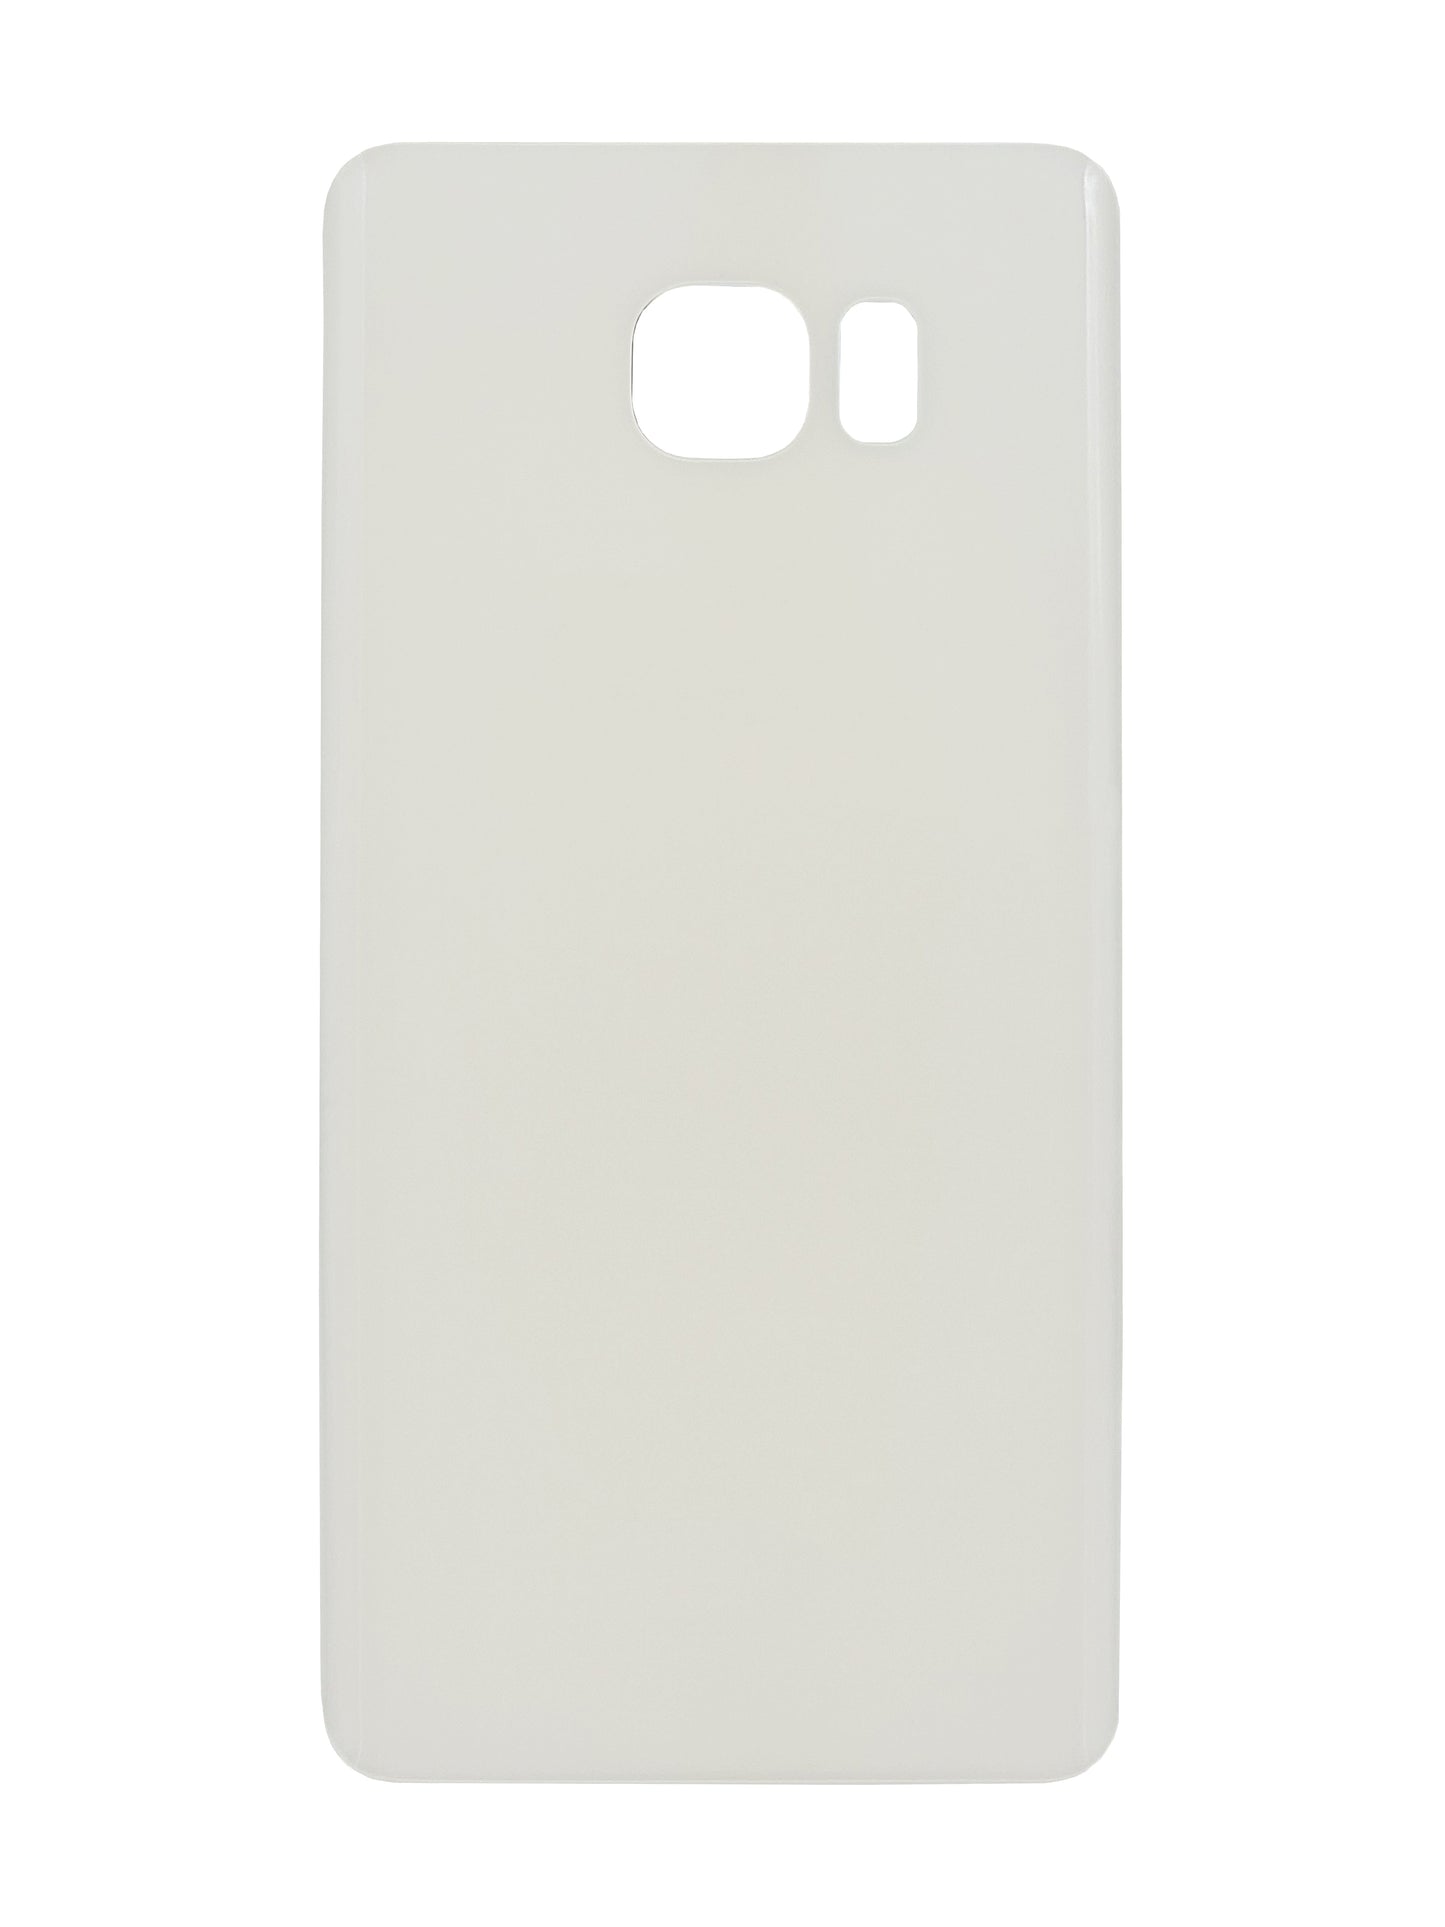 SGN Note 5 Back Cover (White)